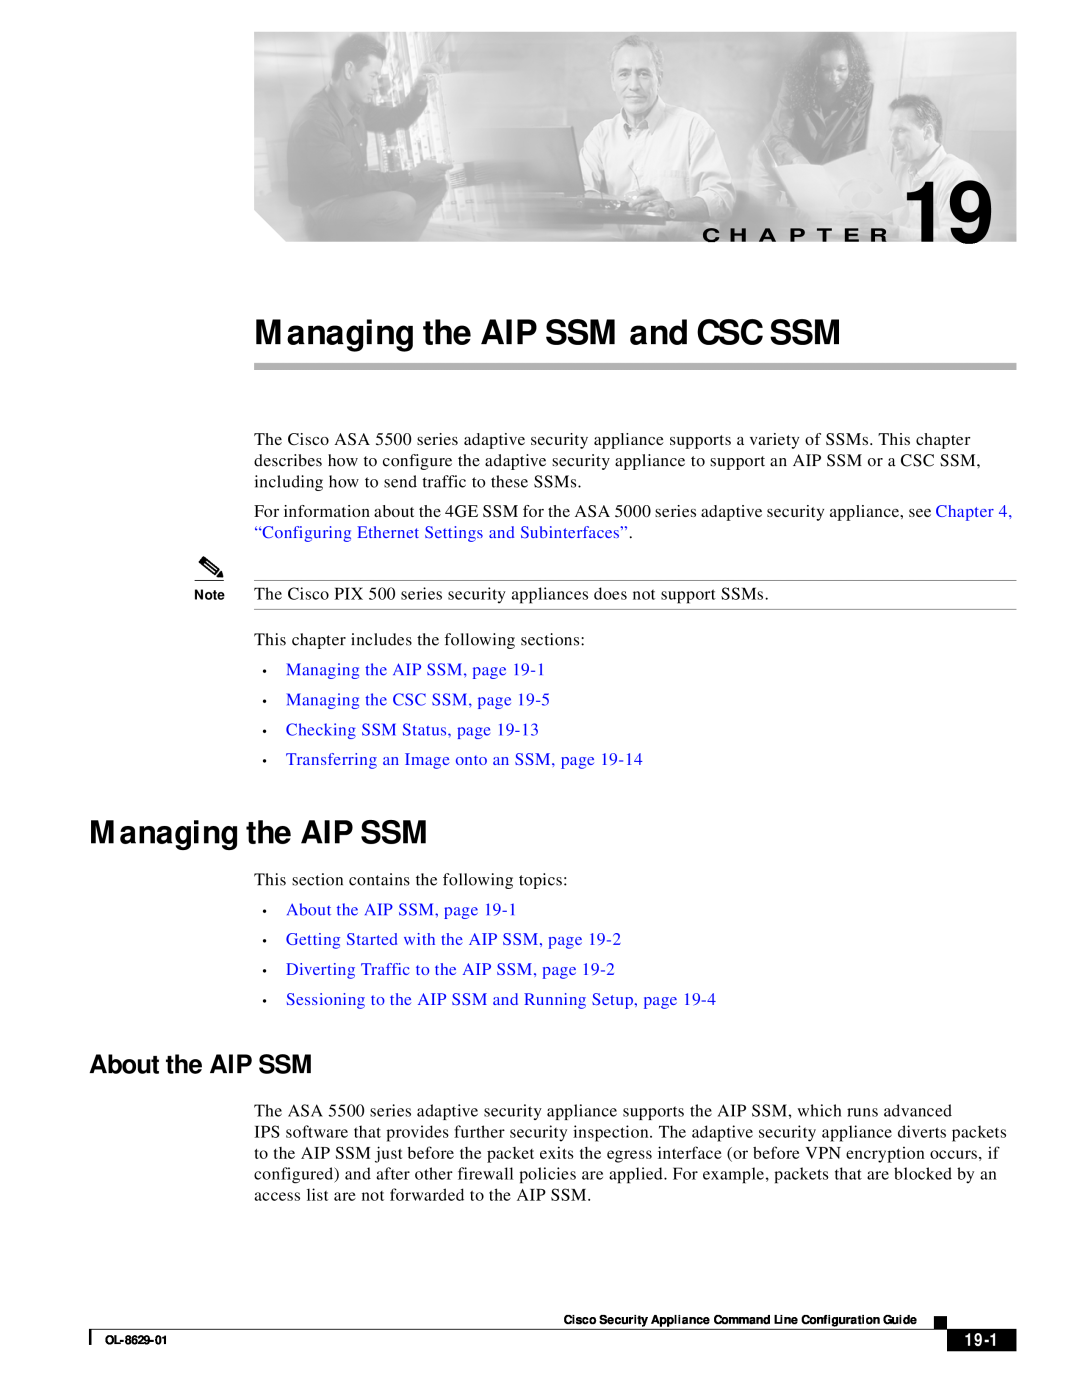 Cisco Systems ASA 5500 manual About the AIP SSM, •Managing the AIP SSM, page, •Managing the CSC SSM, page, 19-1 